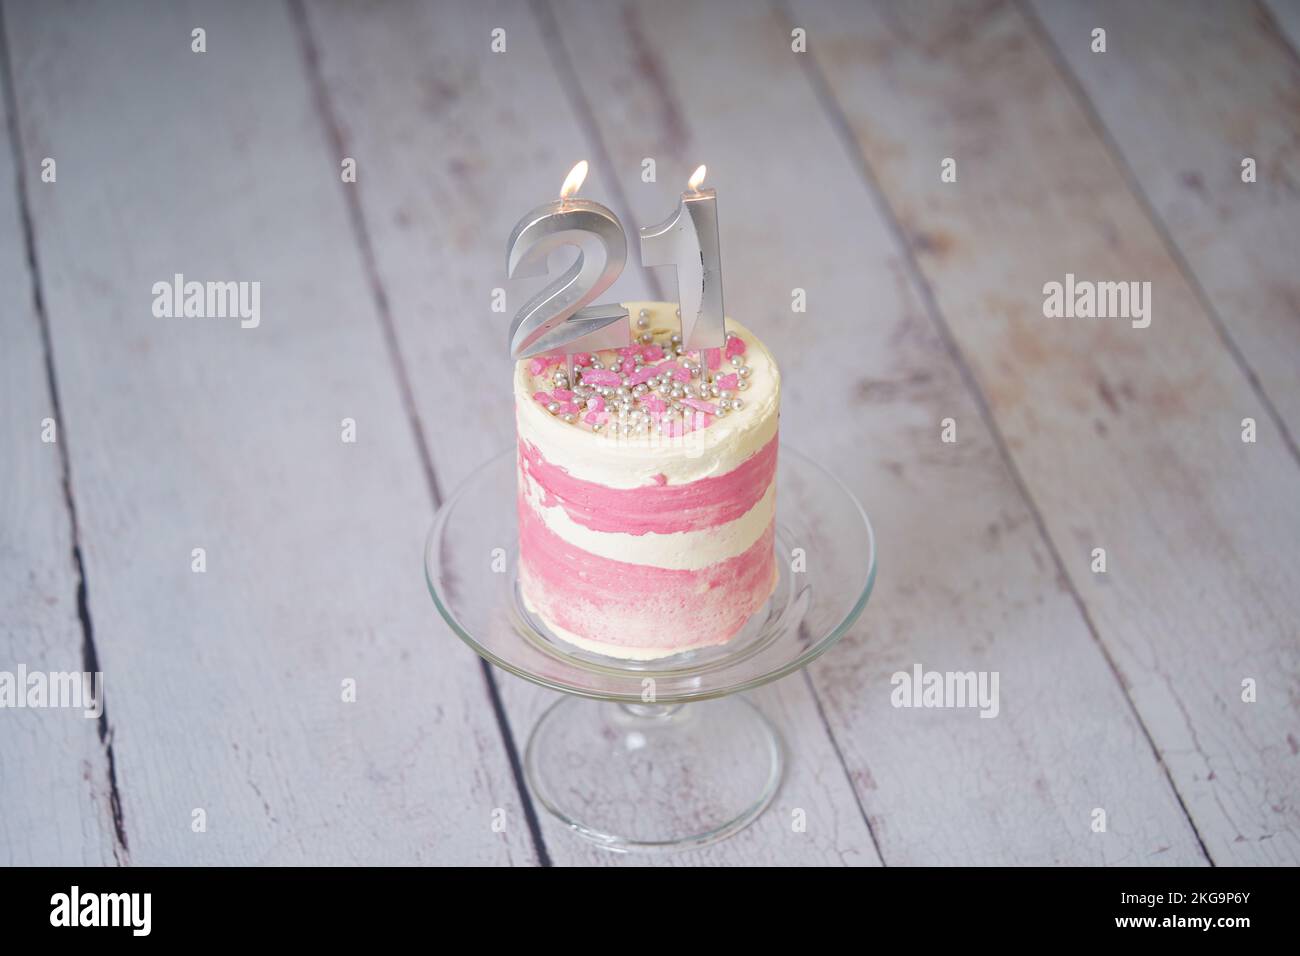 21st Birthday cake pink and silver cake with some sprinkles and 21st candlelight on a white wooden background. Stock Photo